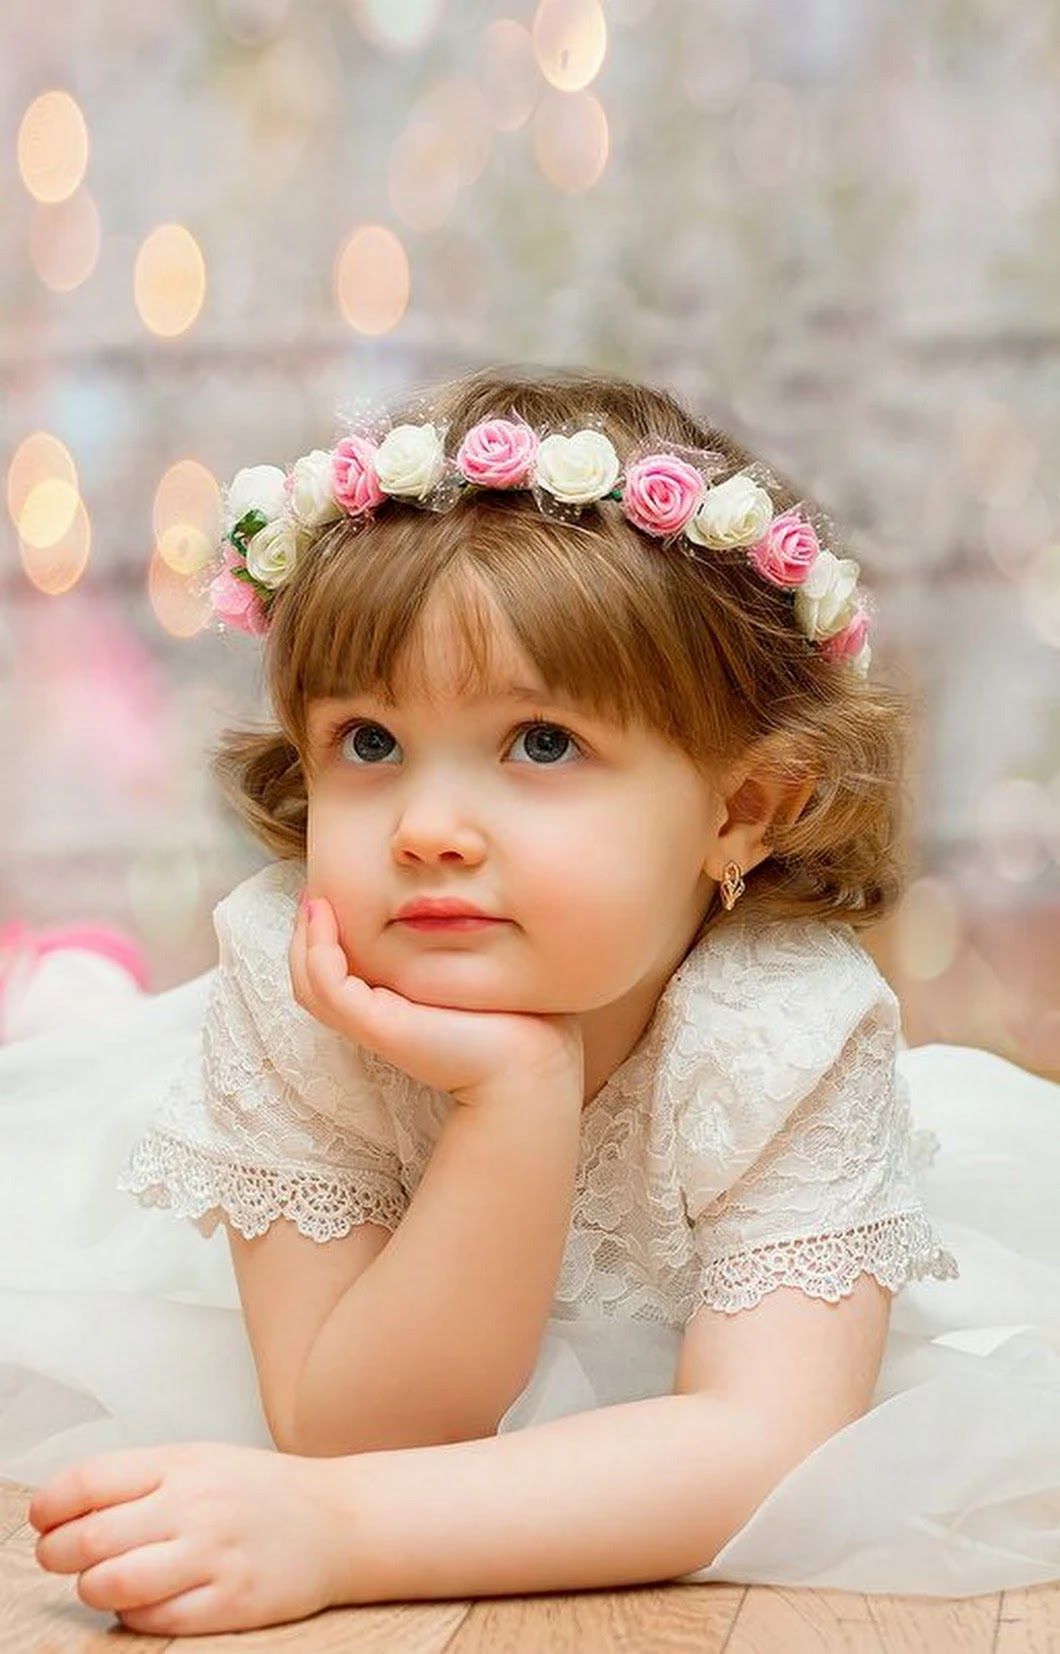 cute baby hands wallpapers,child,hair,hair accessory,pink,headpiece